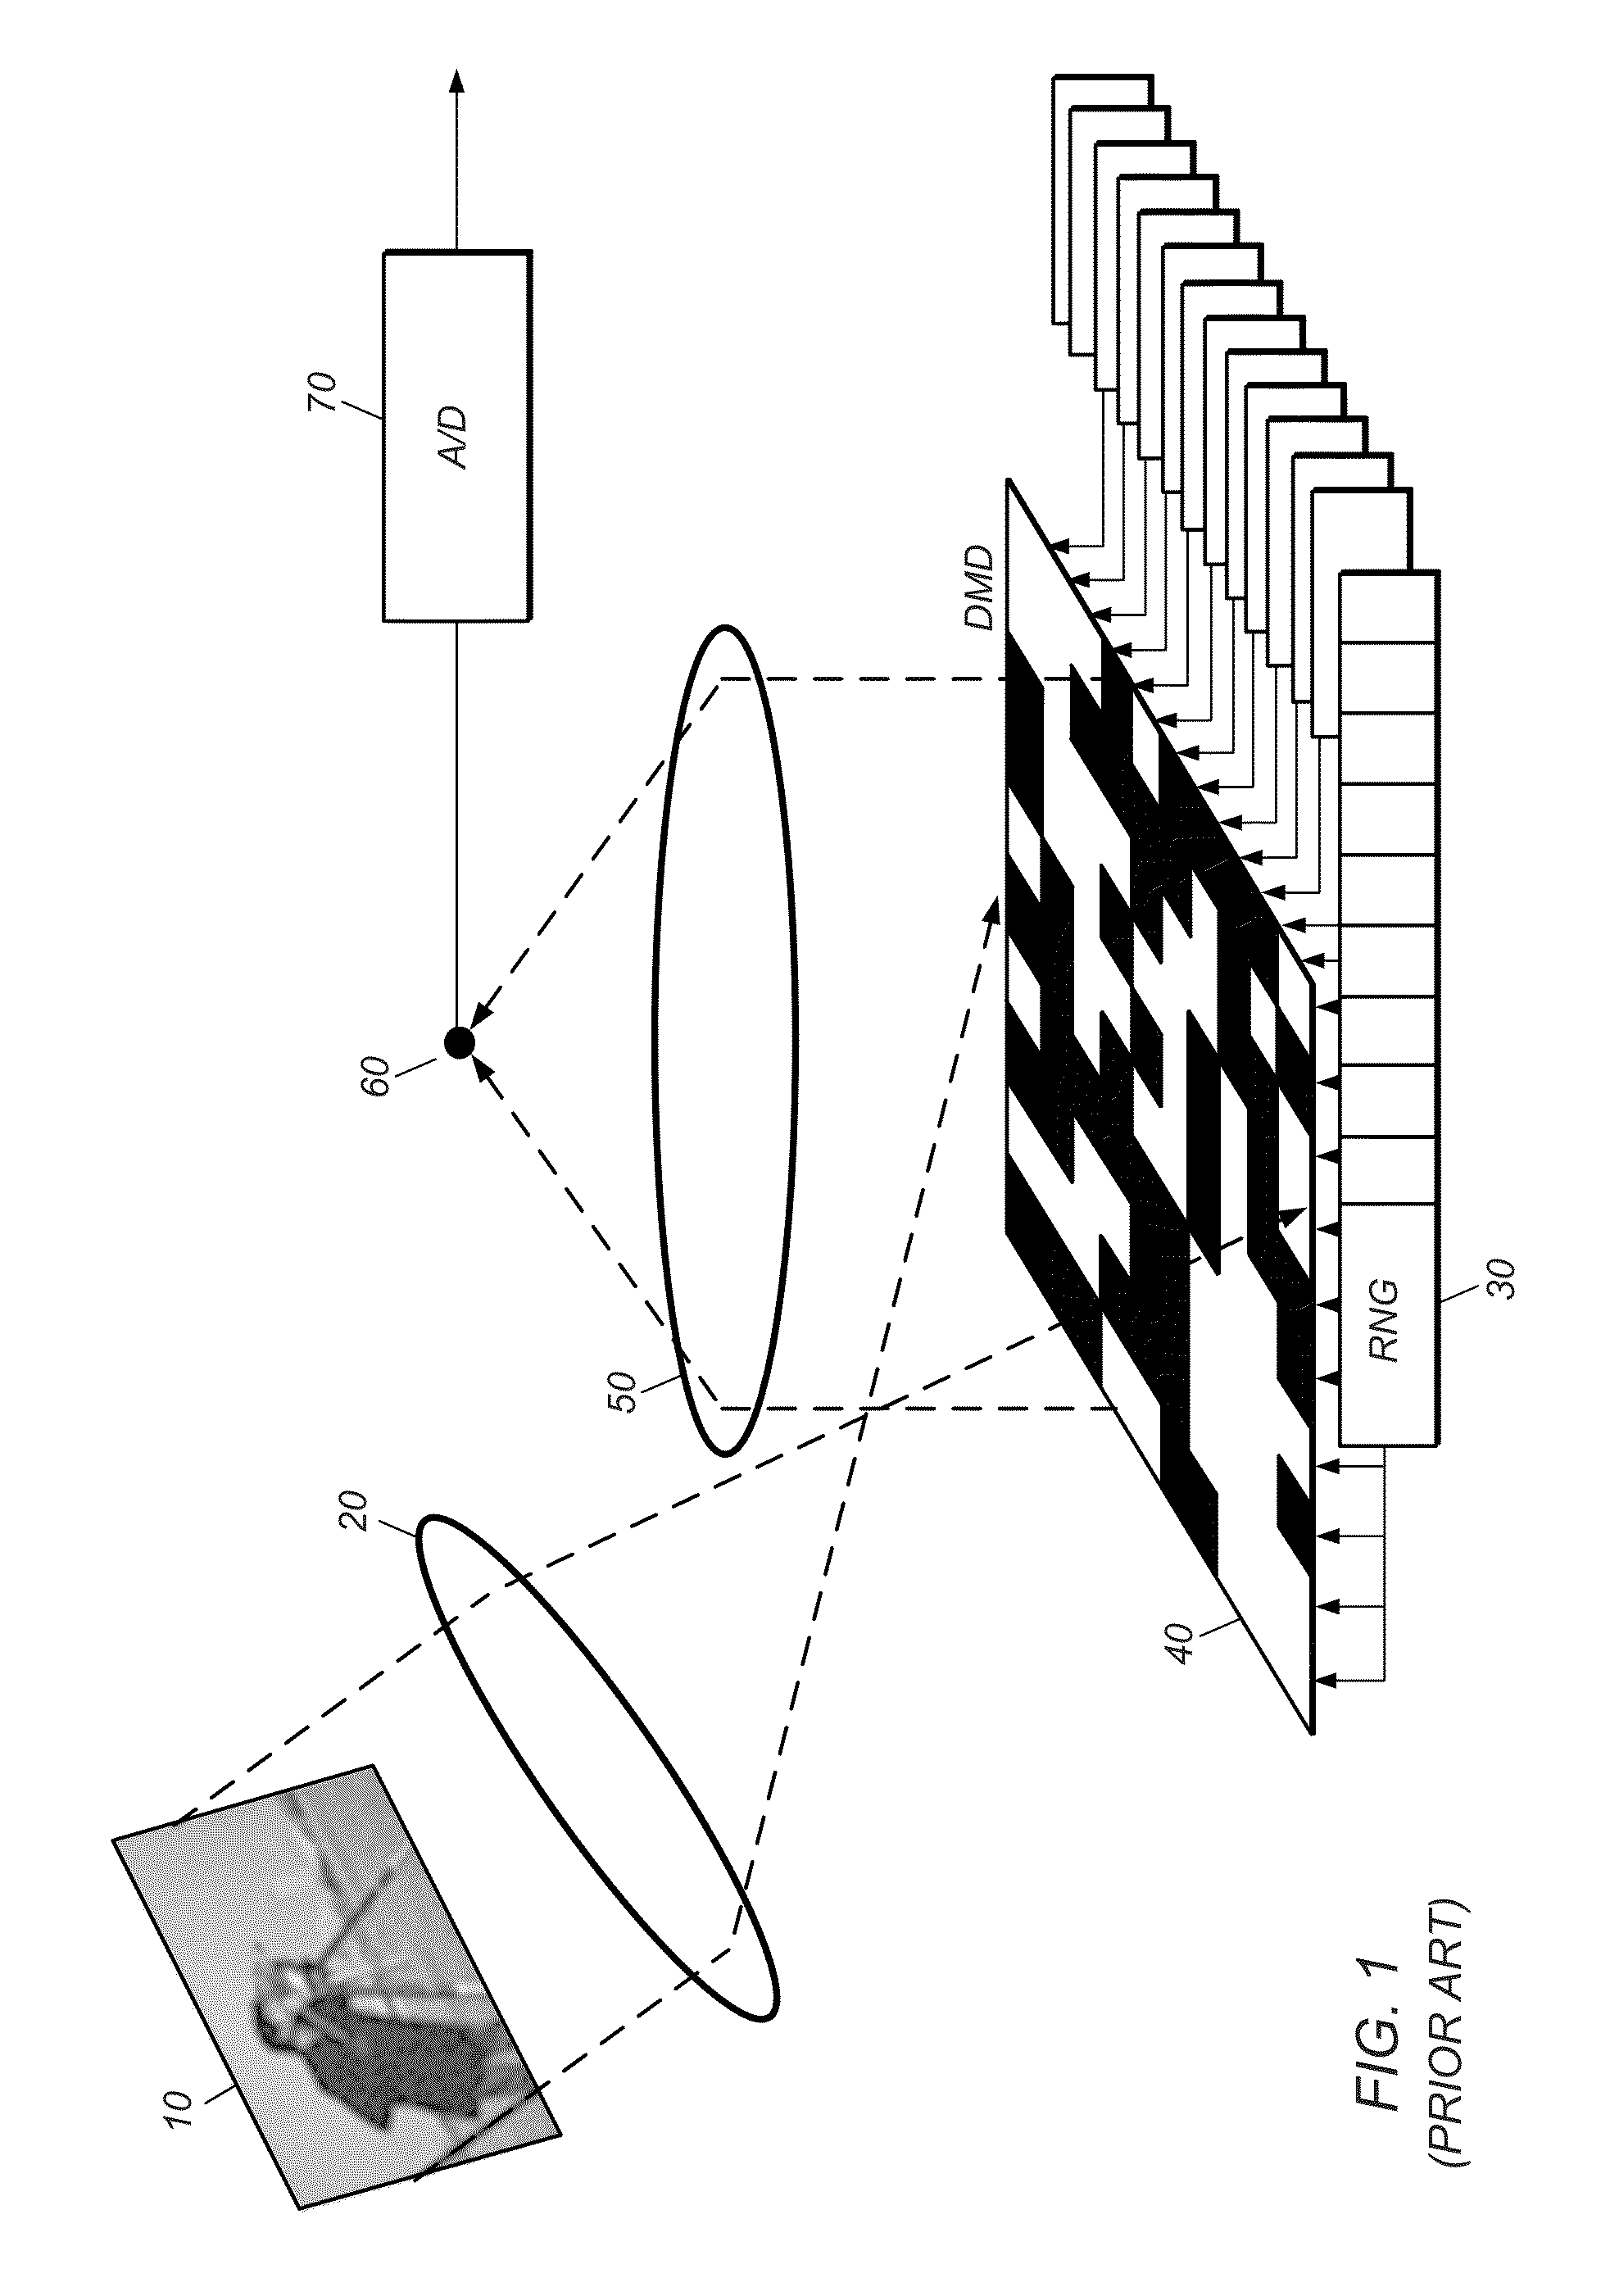 Overlap patterns and image stitching for multiple-detector compressive-sensing camera